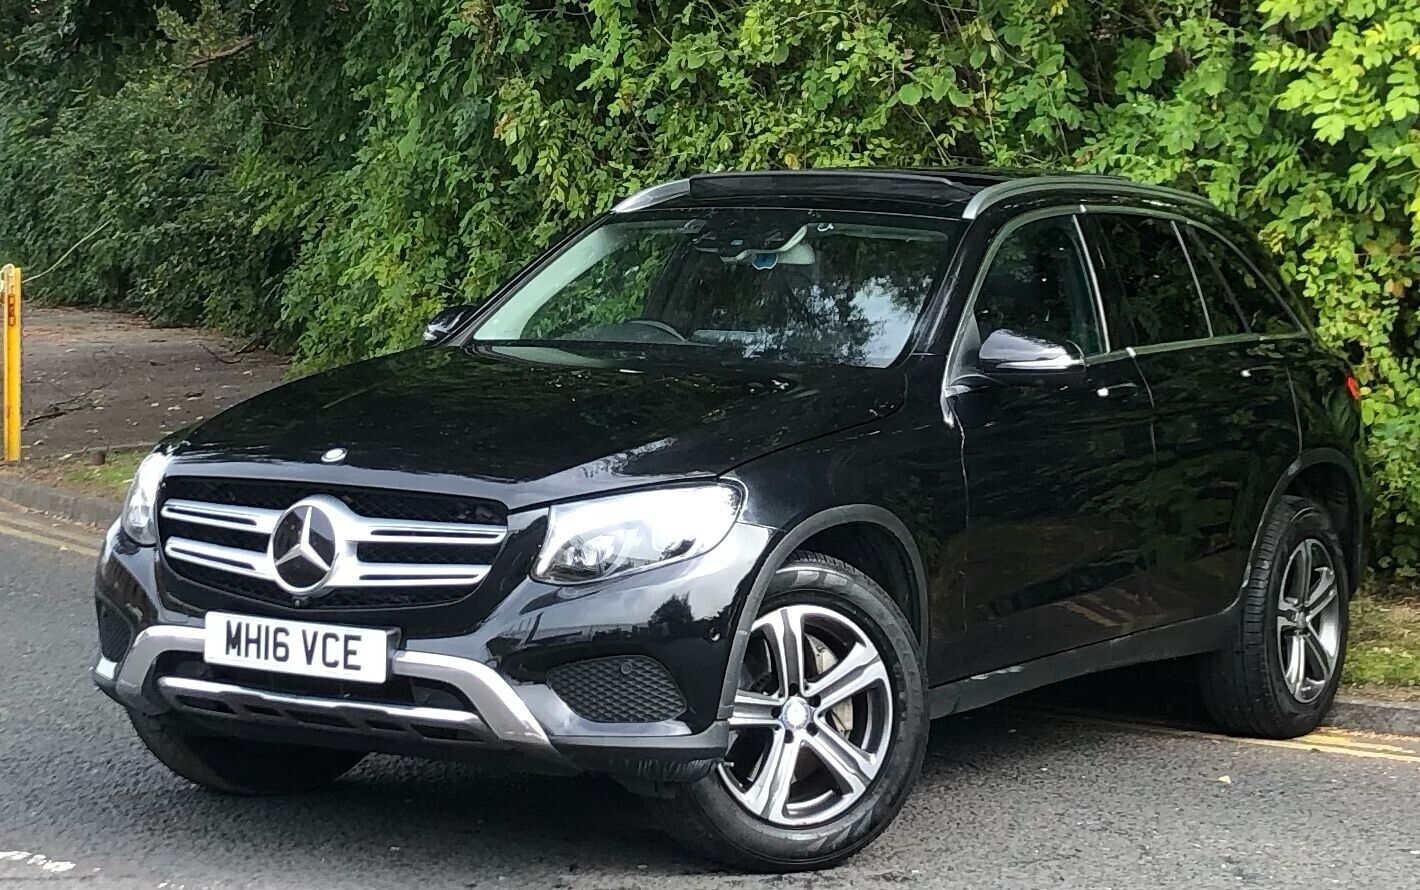 Bid on 2 KEYS ** 2016 MERCEDES-BENZ GLC250D 4 MATIC AMG LINE PREMIUM AUTO ULEZ EURO 6- Buy &amp; Sell on Auction with EAMA Group